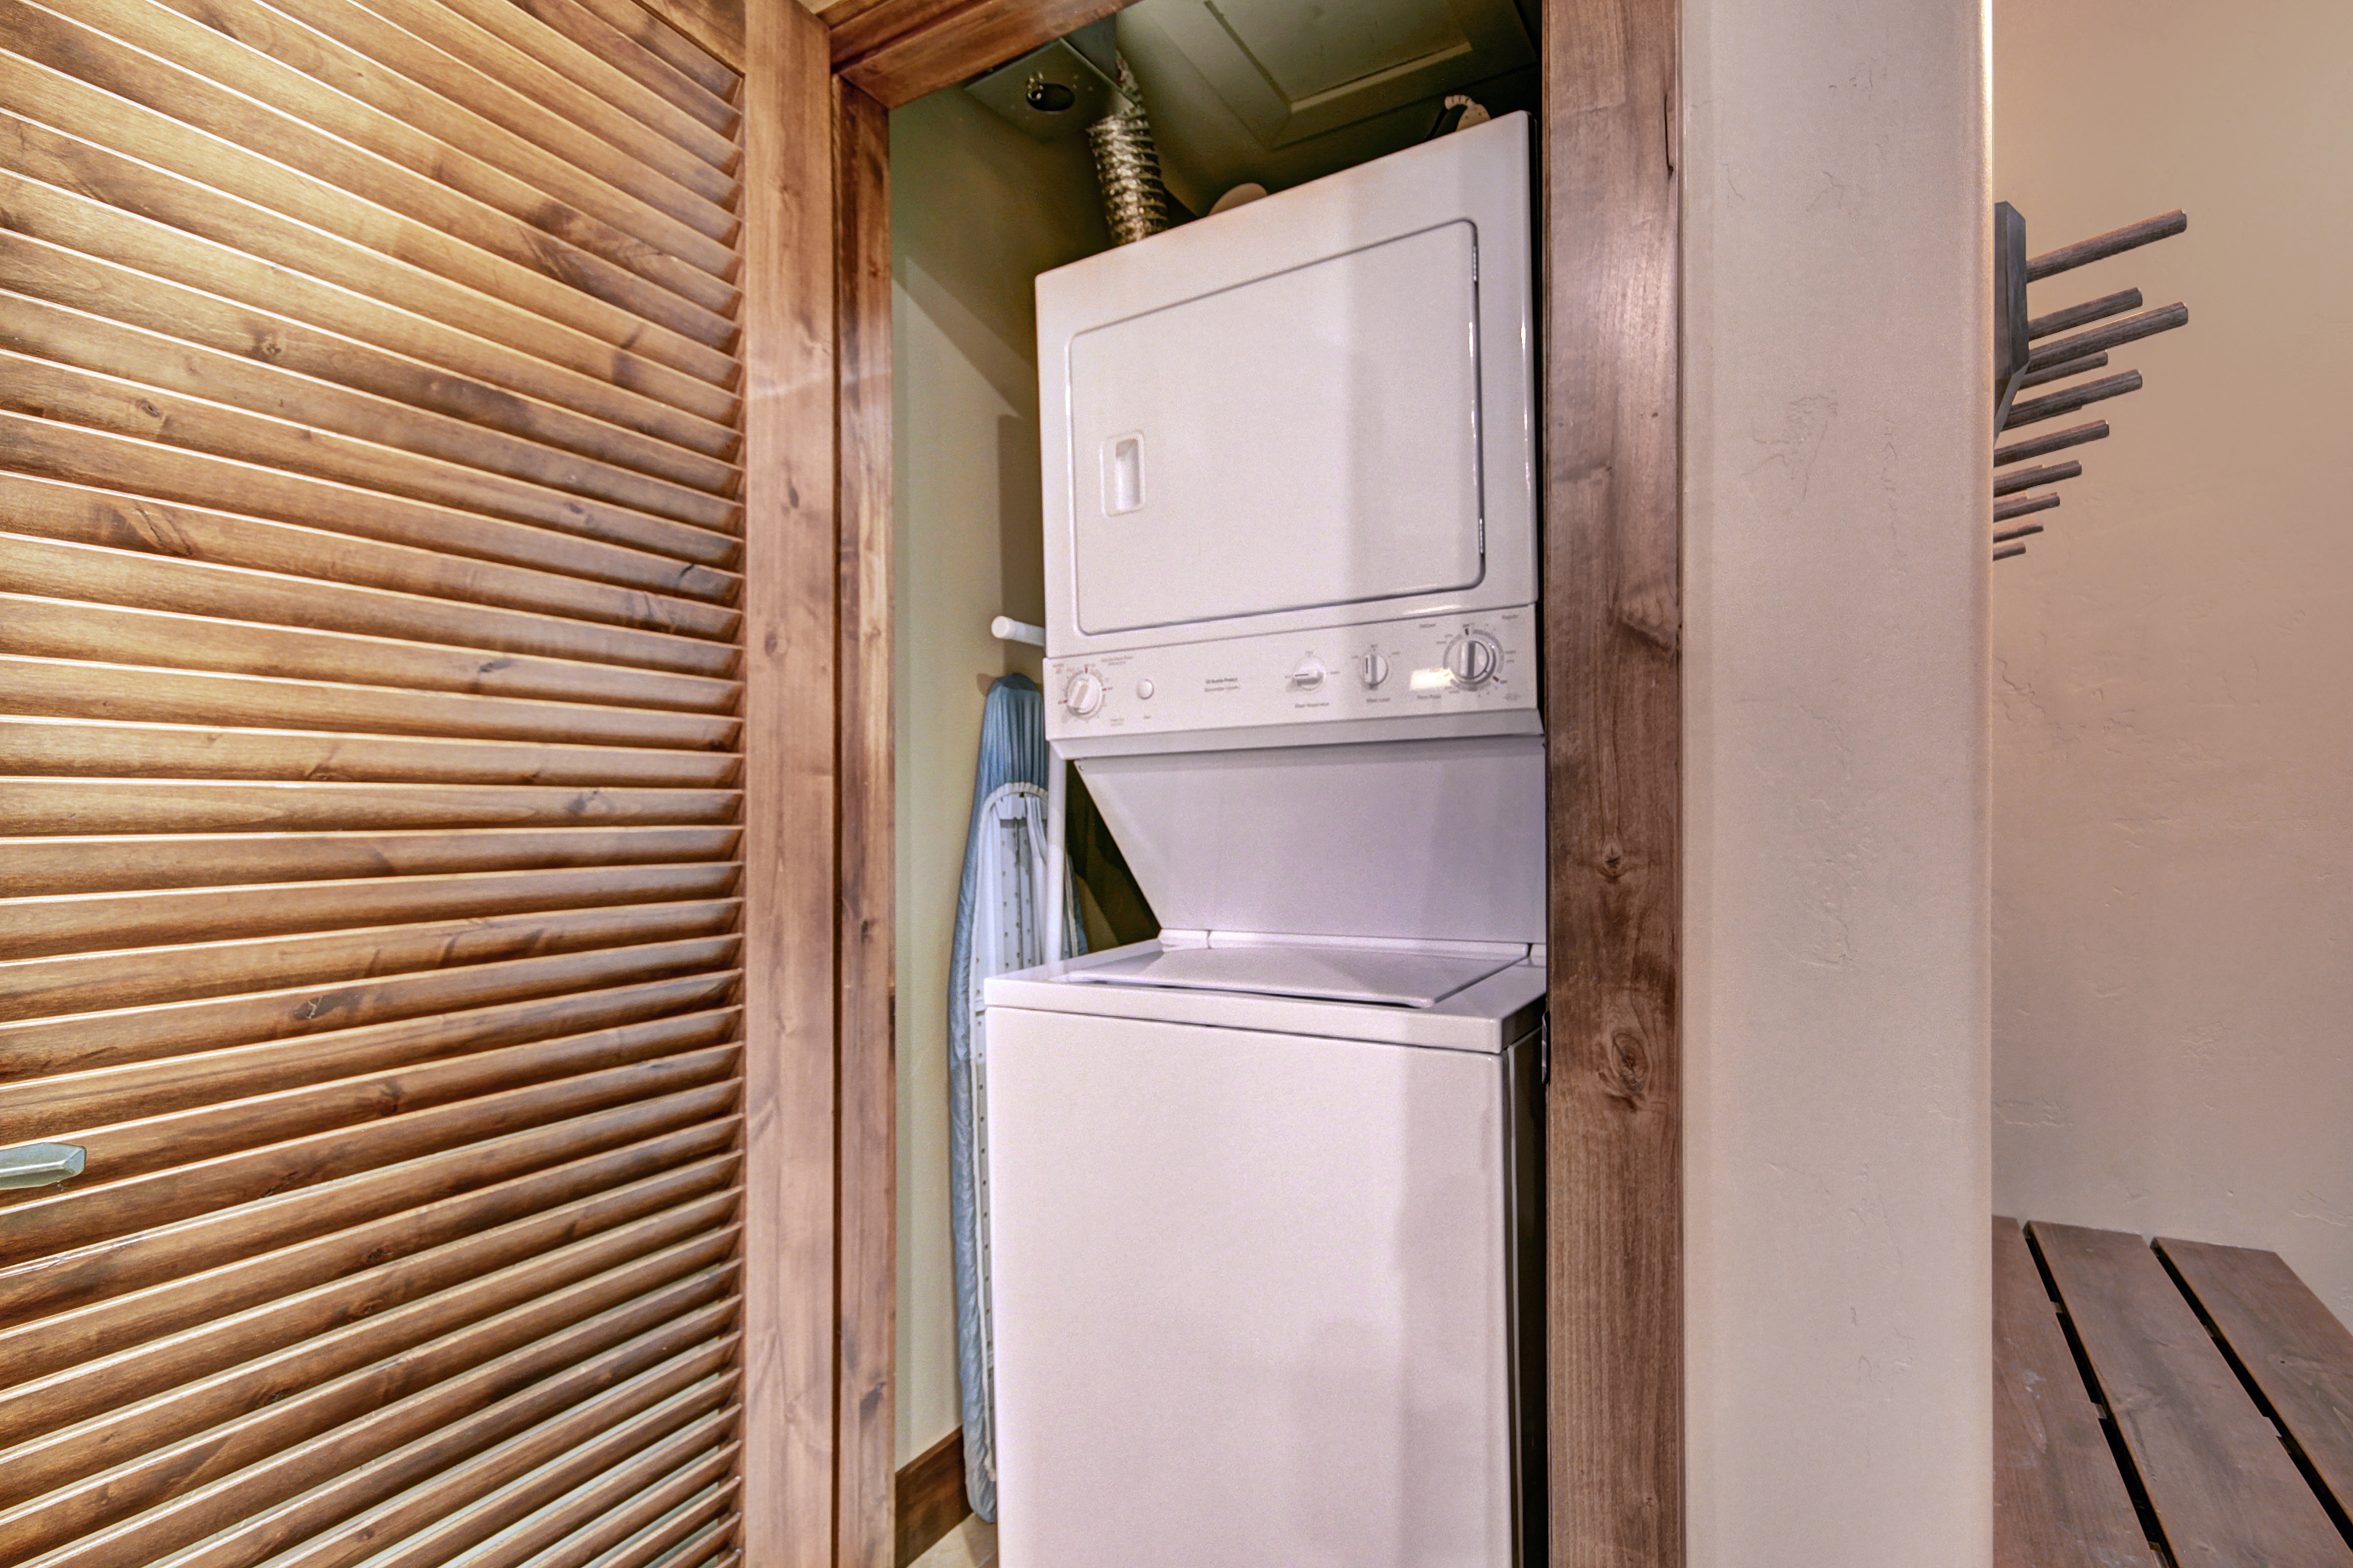 Private Laundry – Stackable Washer & Dryer Located in Utility Closet.